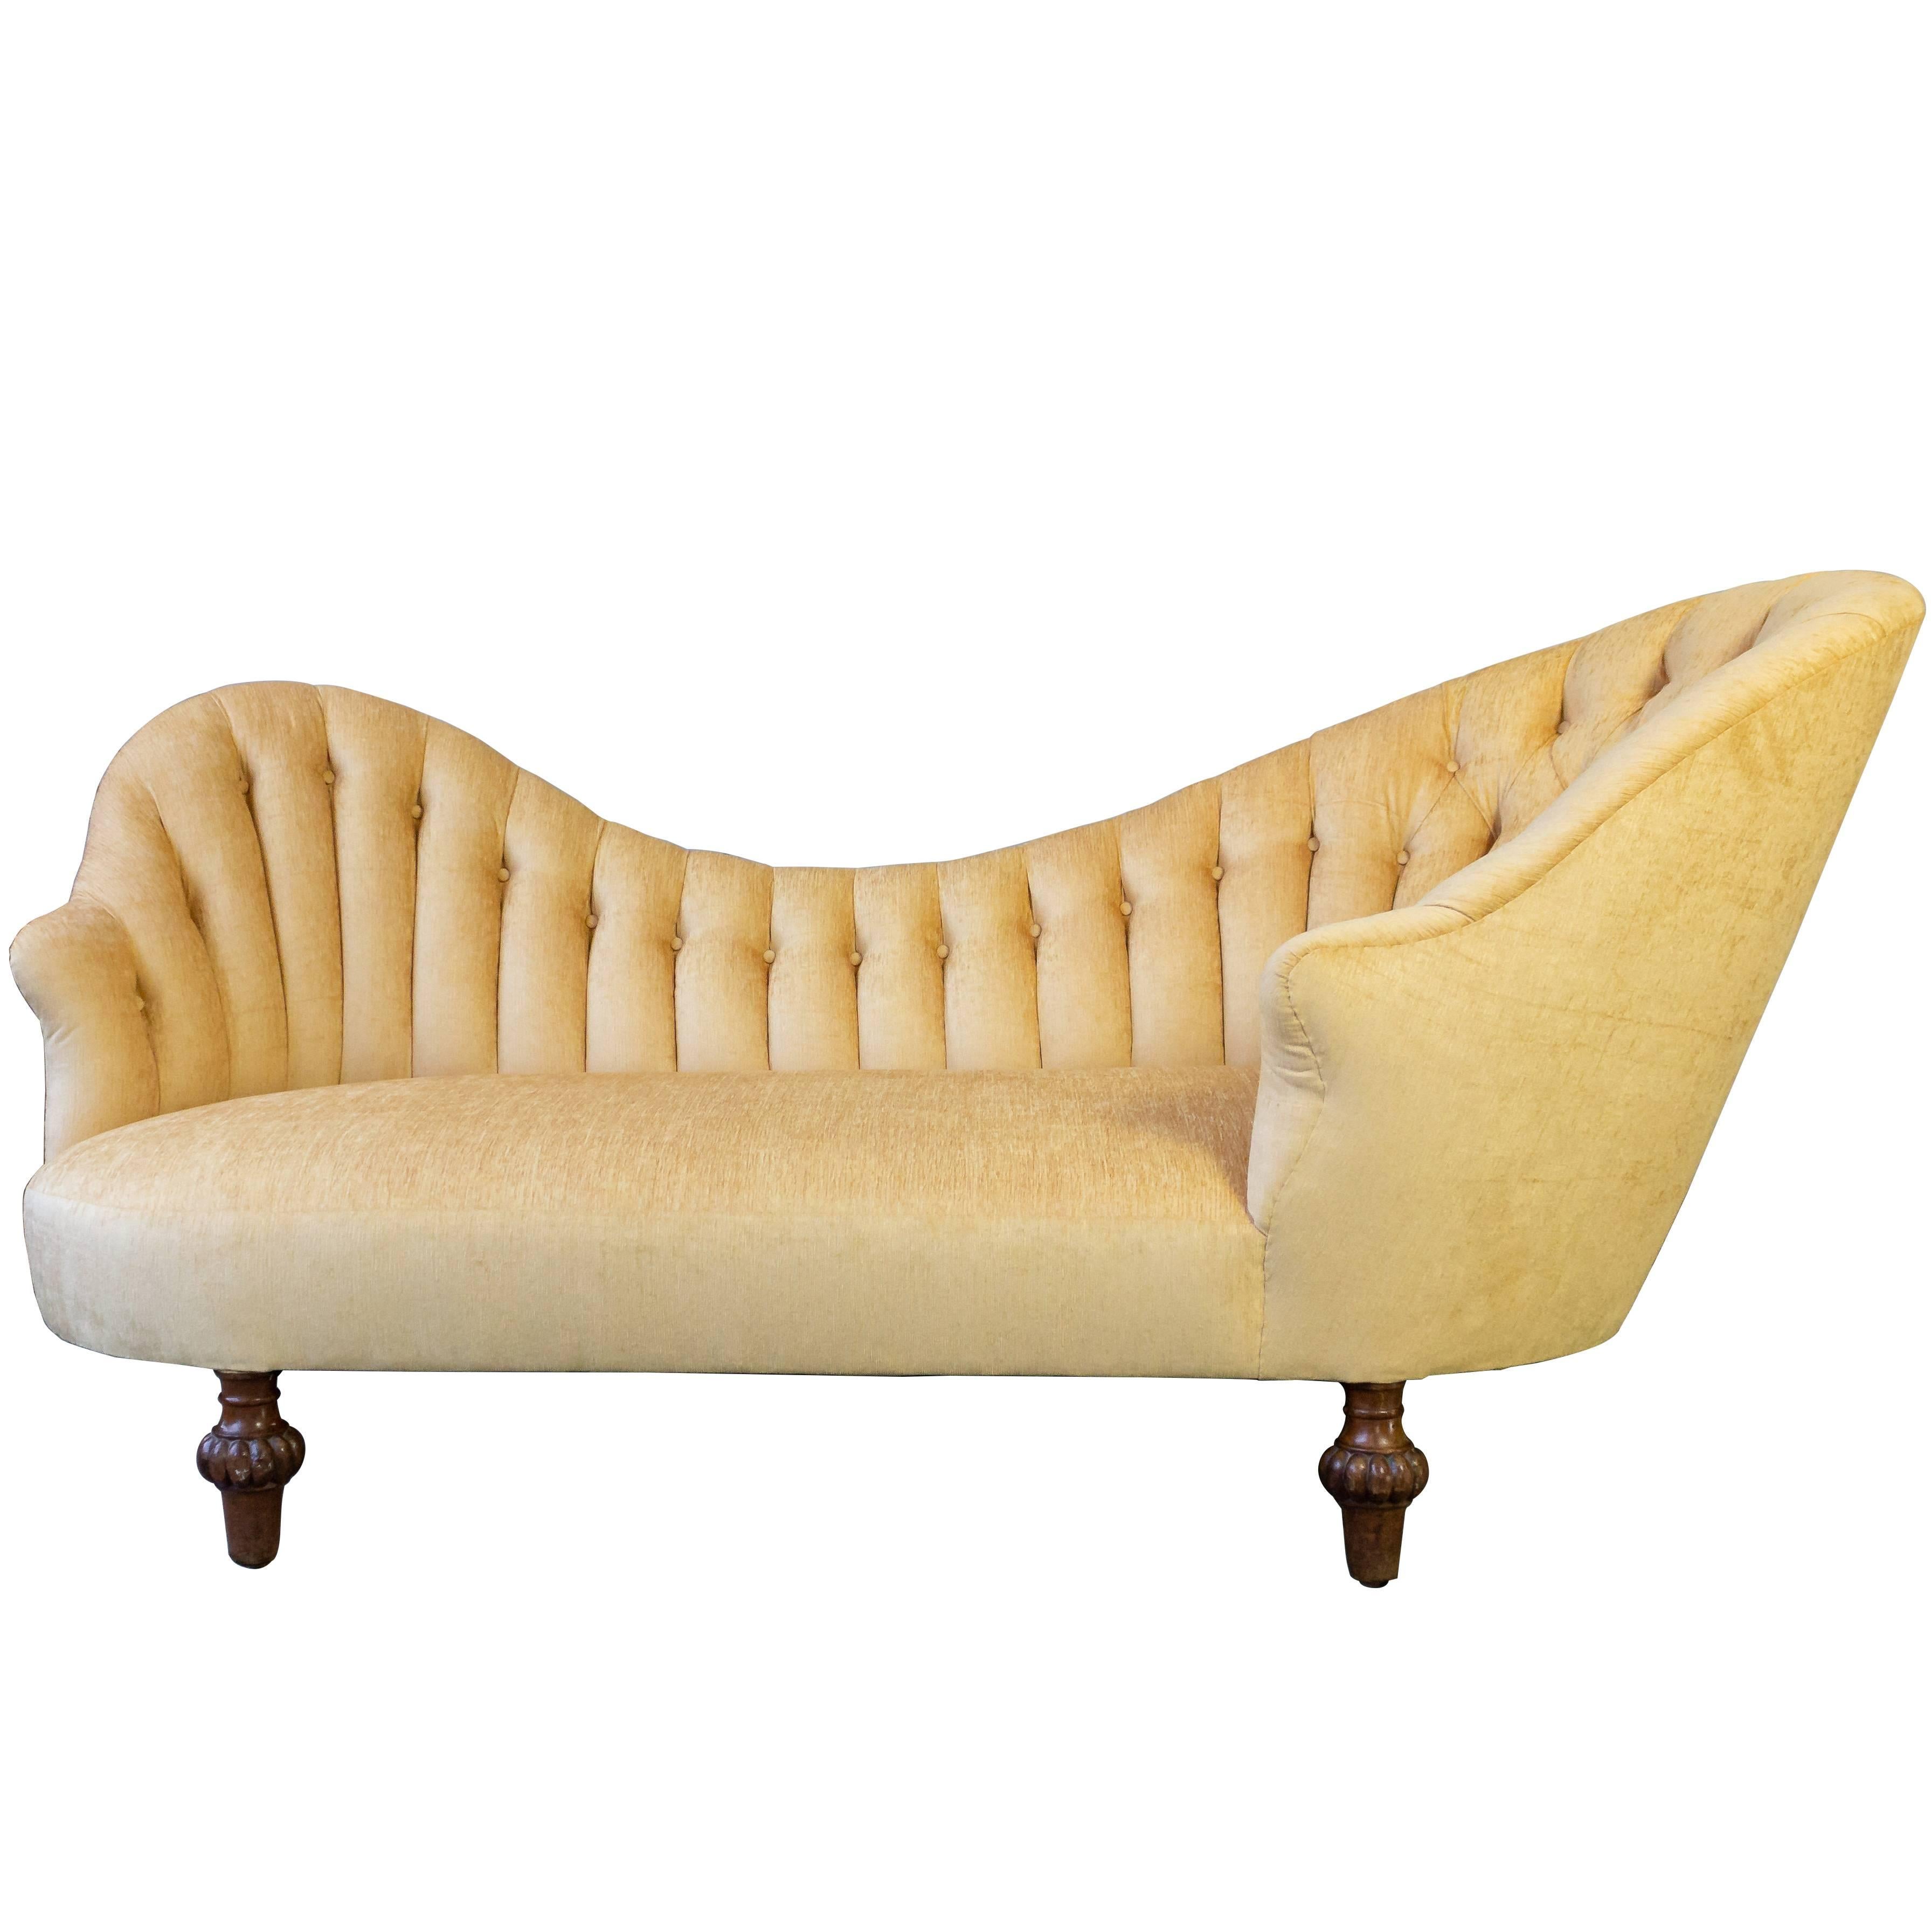 Asymmetrical French 19th Century Settee with Tufted Curved Back